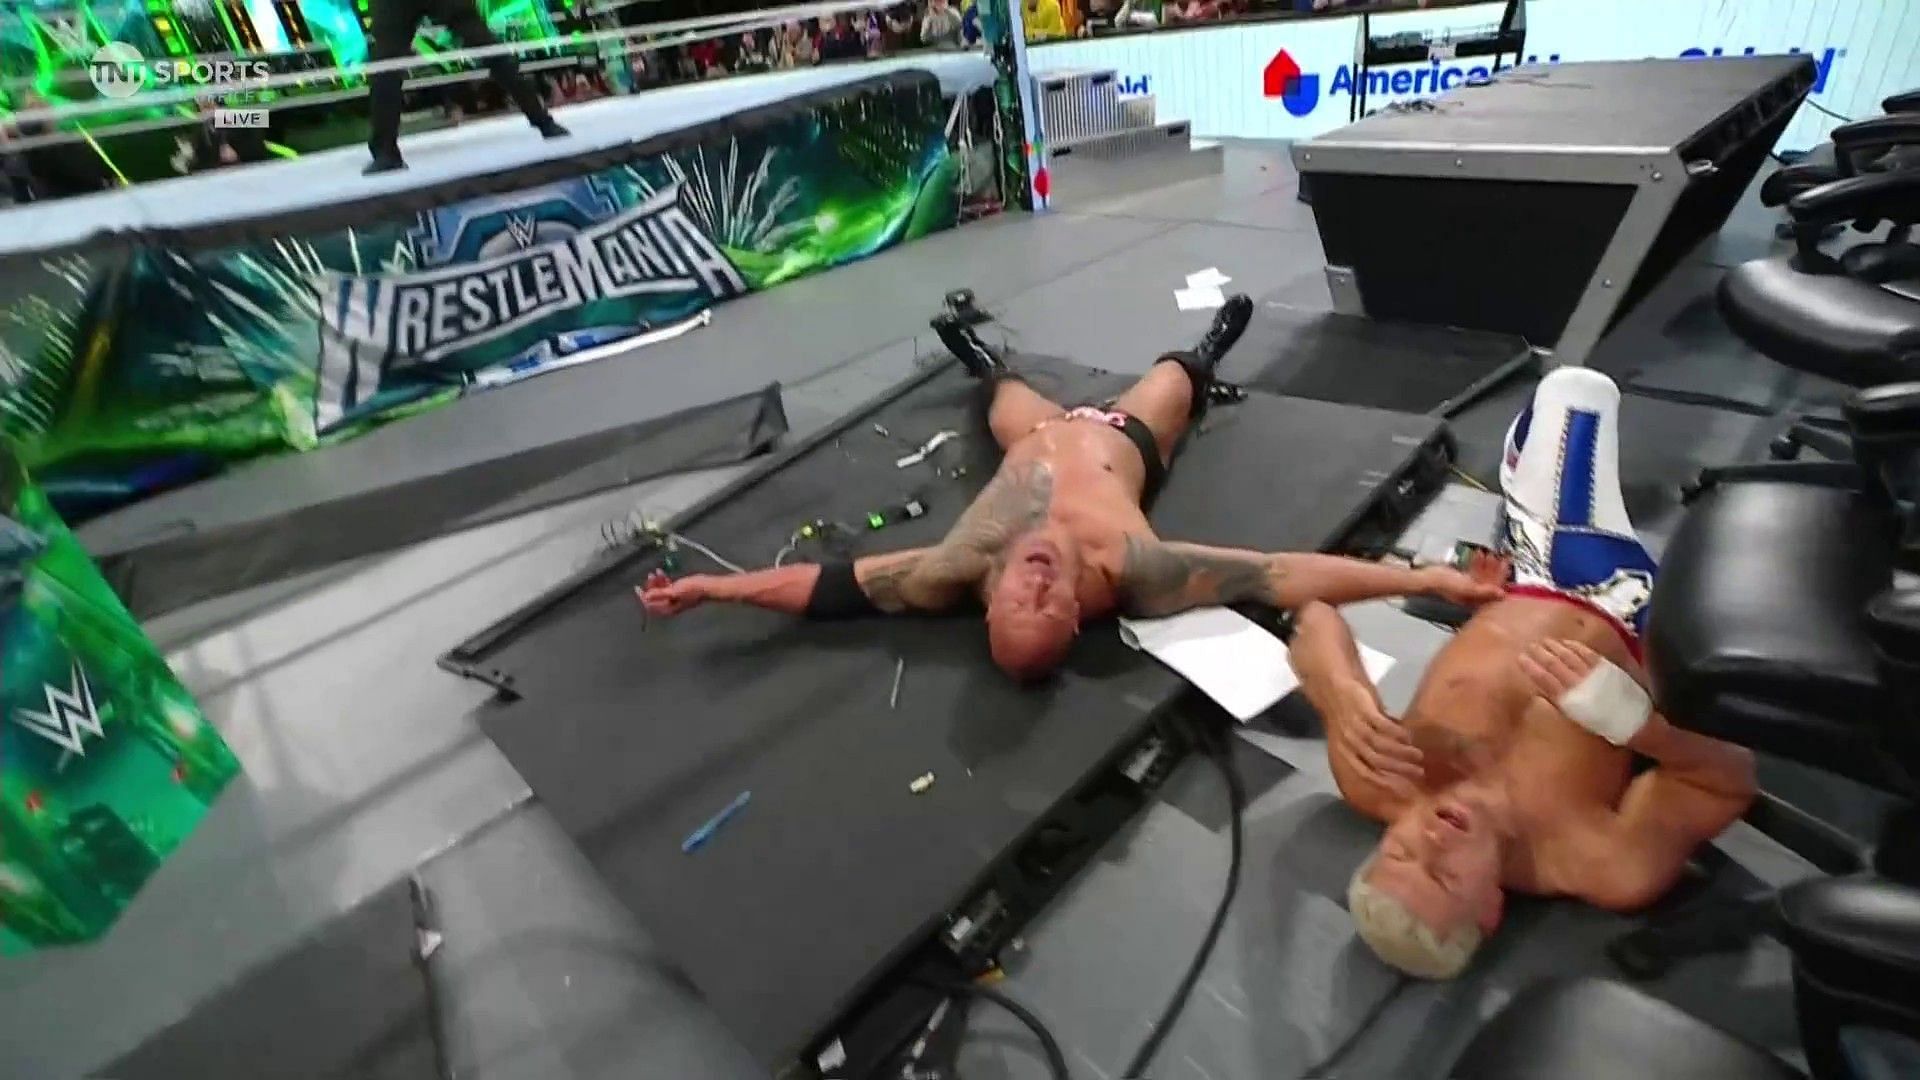 The Rock was put through a table at WrestleMania